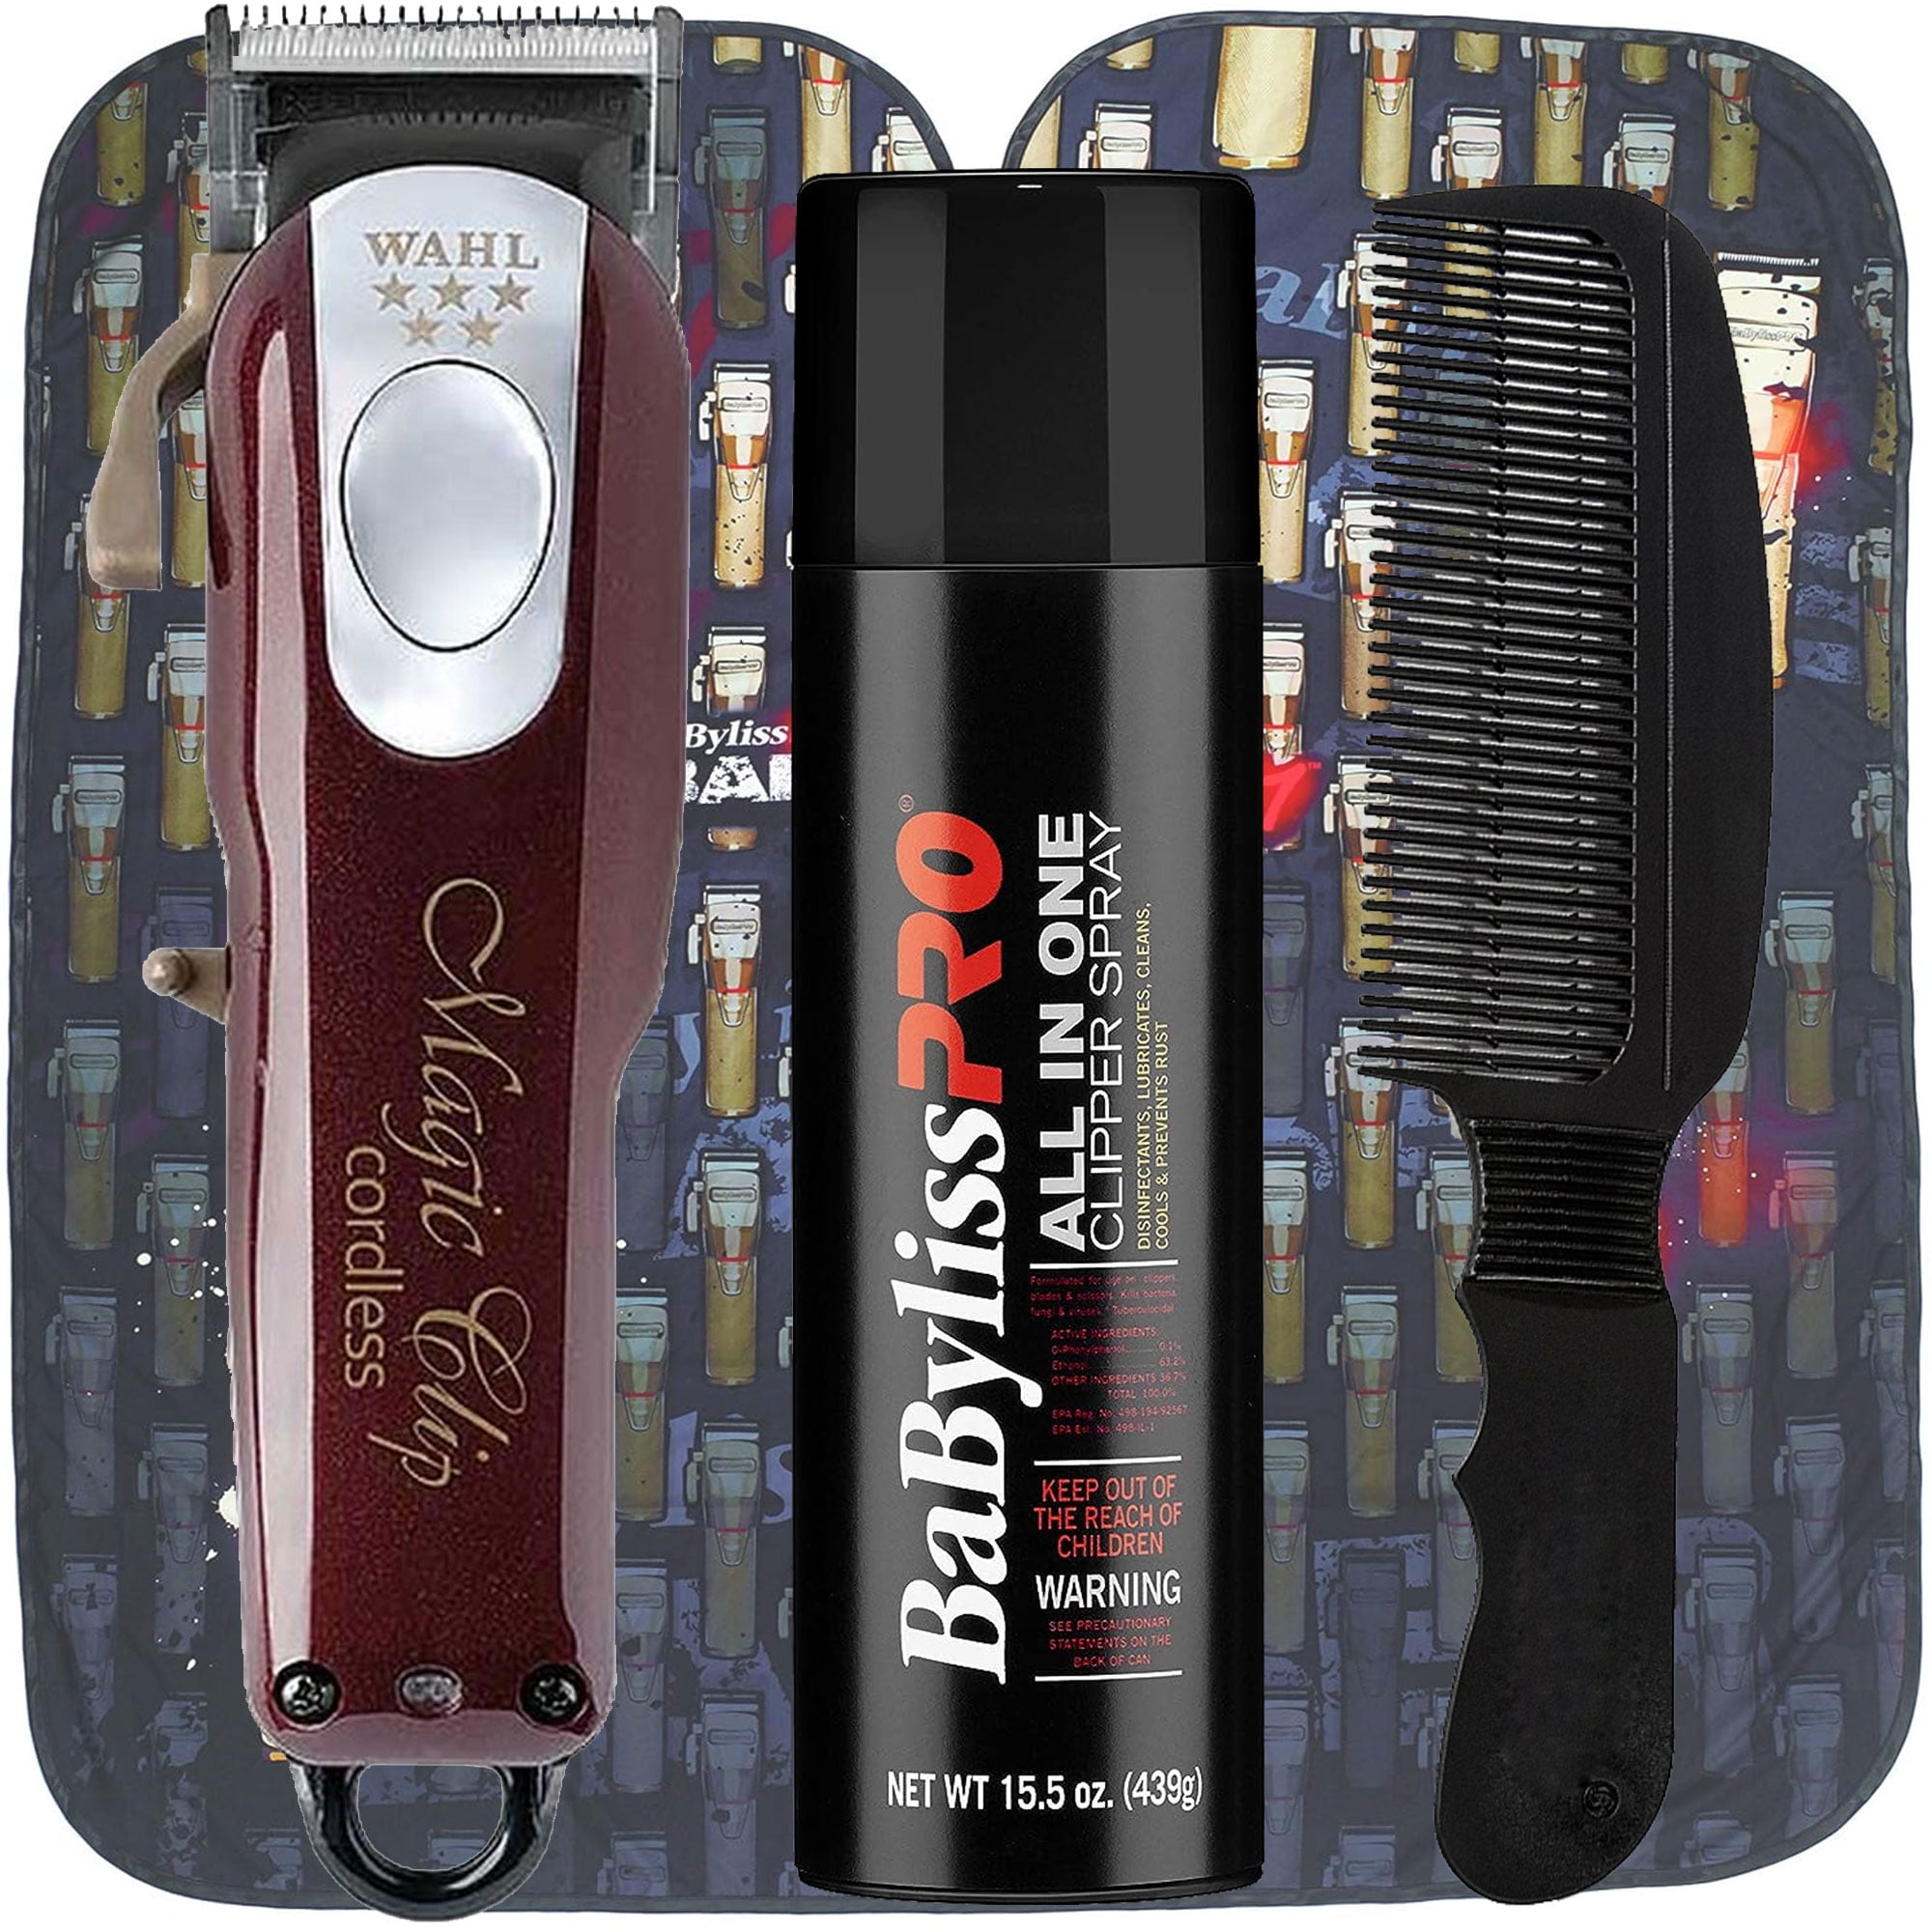  Wahl Professional 5-Star Cord/Cordless Magic Clip #8148 with  Travel Case #90728 : Beauty & Personal Care